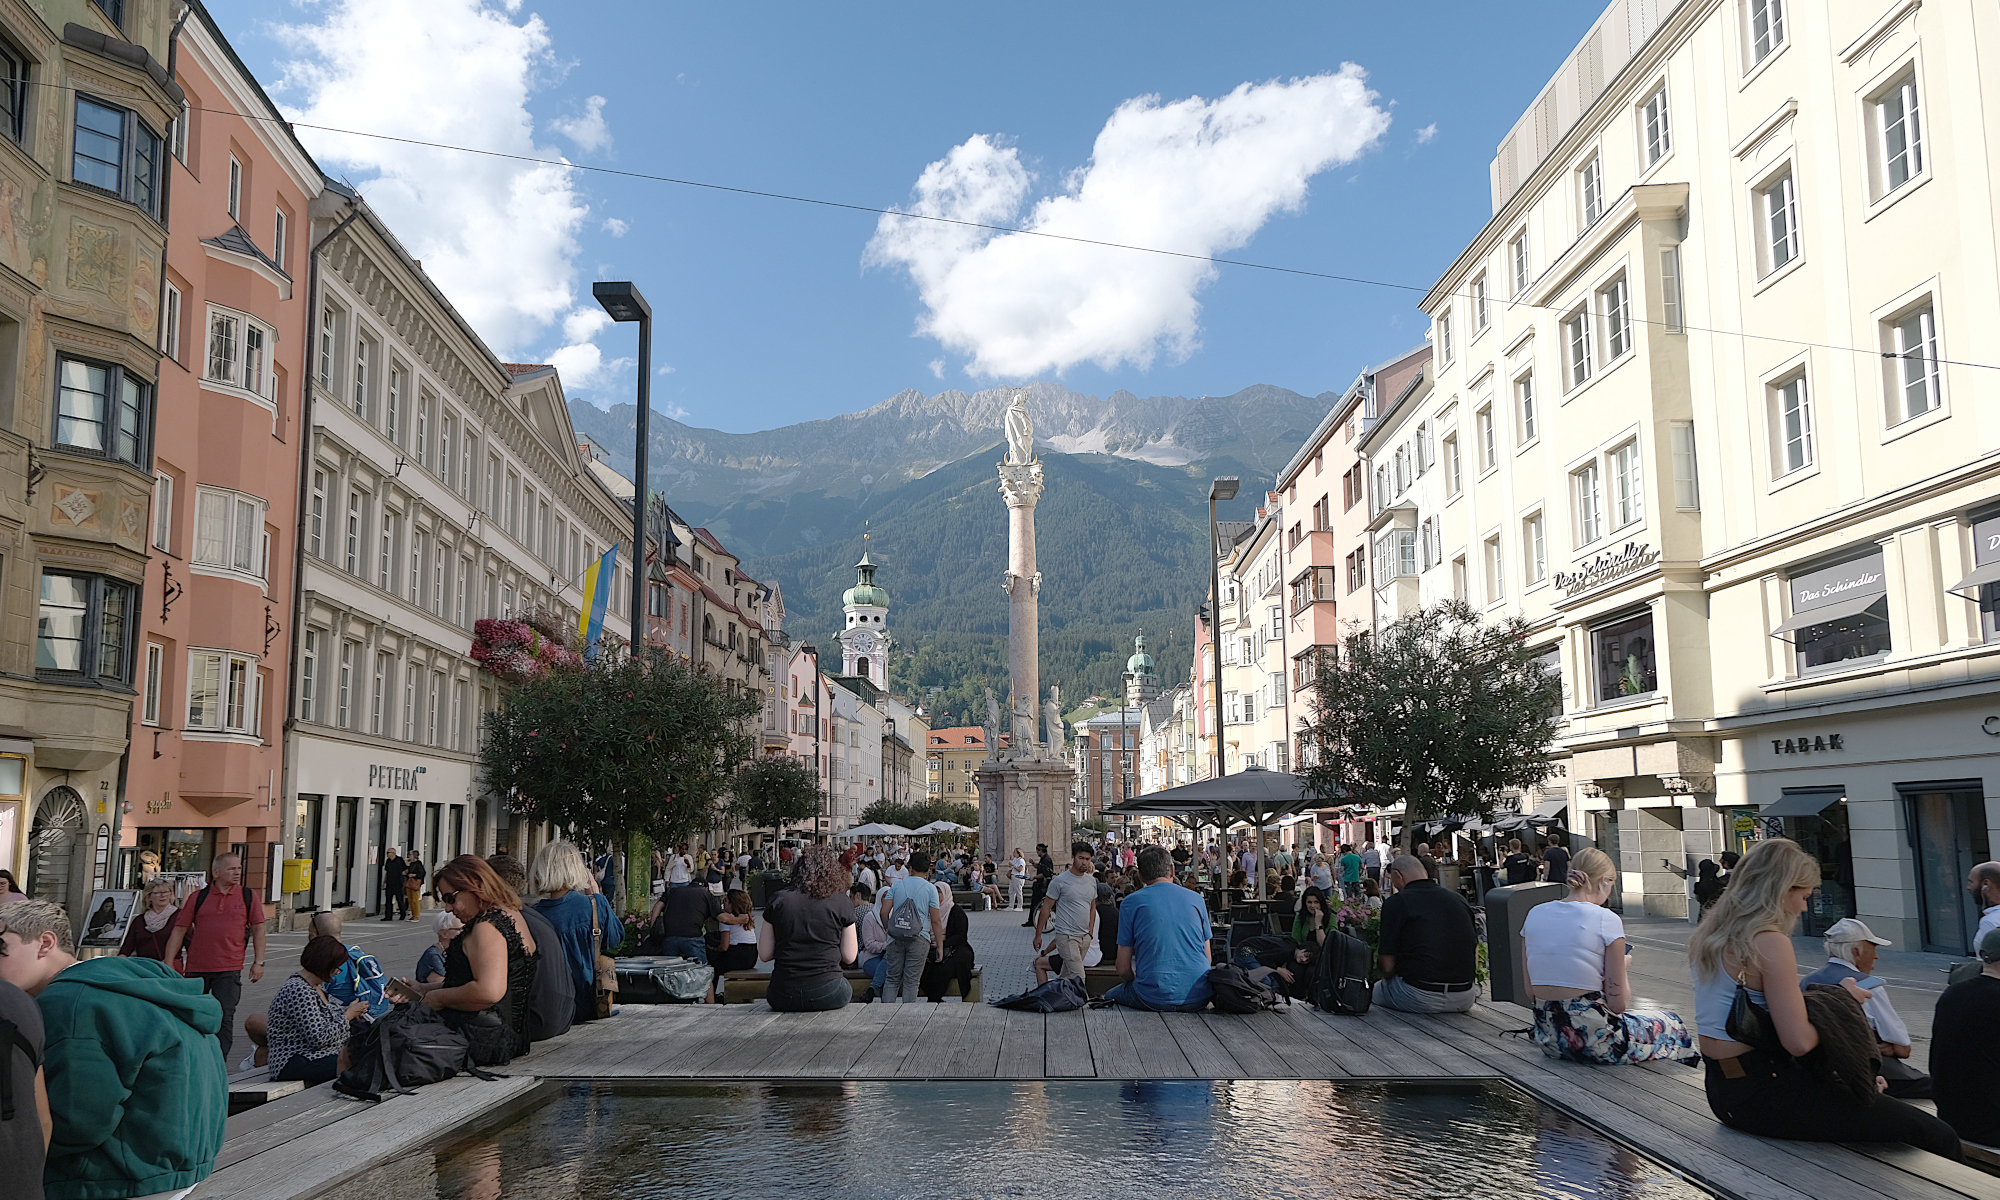 Landscape format; In the foreground a water well, people sitting around it. Left and right rows of houses; in the middle the Anna's column; in the background mountains (Nordkette); it's a warm and sunny day in September 2022